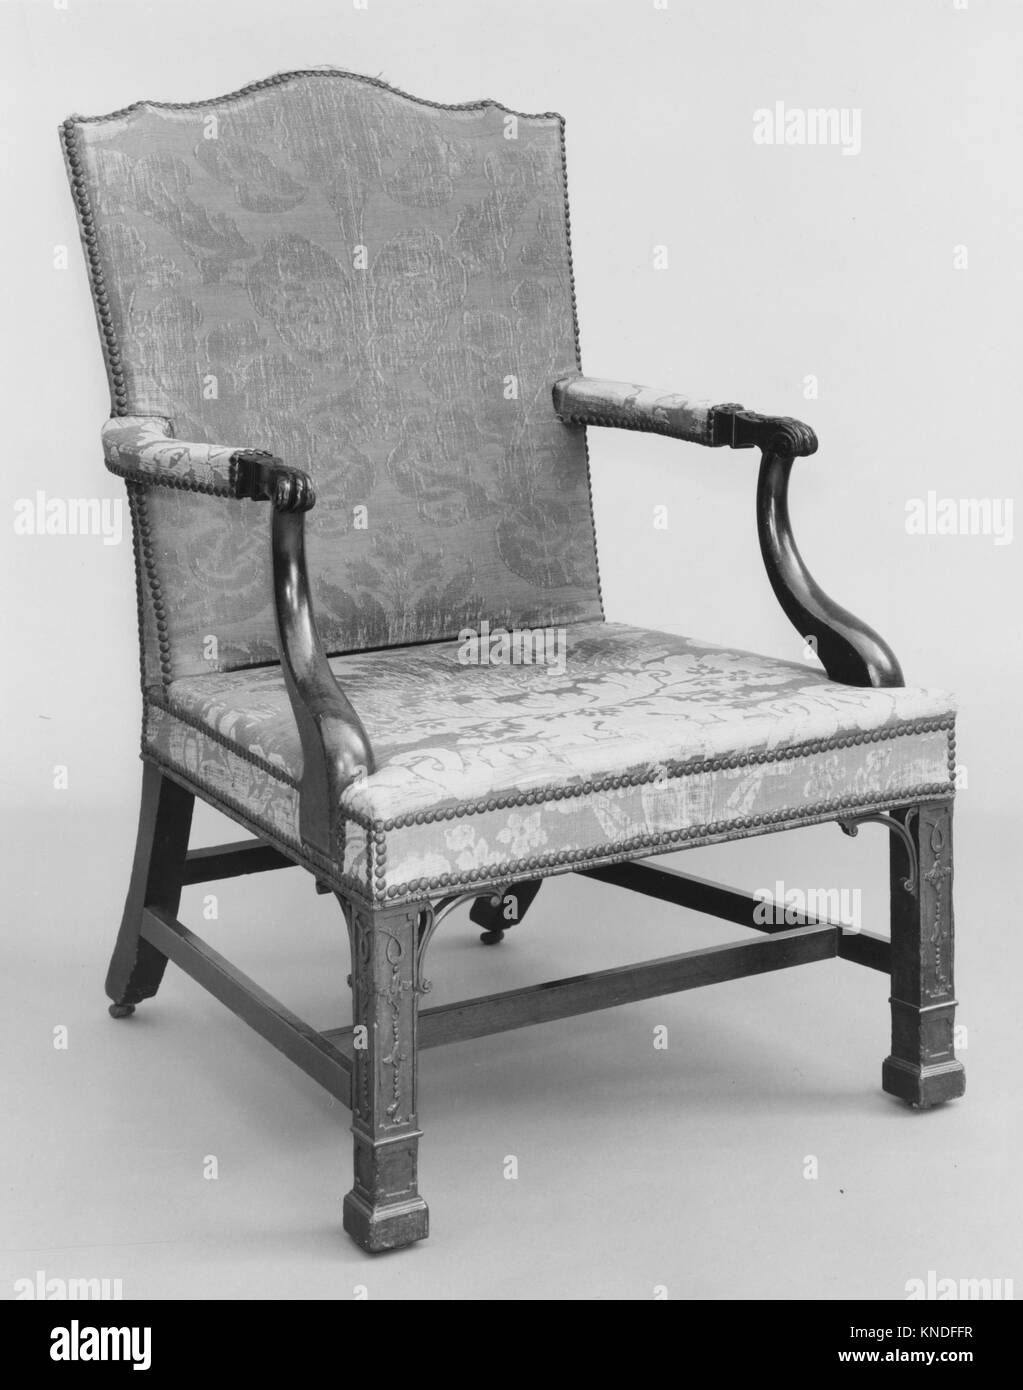 Armchair MET 169821 216 Maker: Attributed to Thomas Affleck, 1740?1795, Armchair, 1765?75, Mahogany, white oak, 43 x 28 1/4 x 30 in. (109.2 x 71.8 x 76.2 cm). The Metropolitan Museum of Art, New York. Purchase, Gift of Mrs. Russell Sage and The Sylmaris Collection, Gift of George Coe Graves, by exchange; Robert G. Goelet Gift; and funds from various donors, 1959 (59.154) Stock Photo